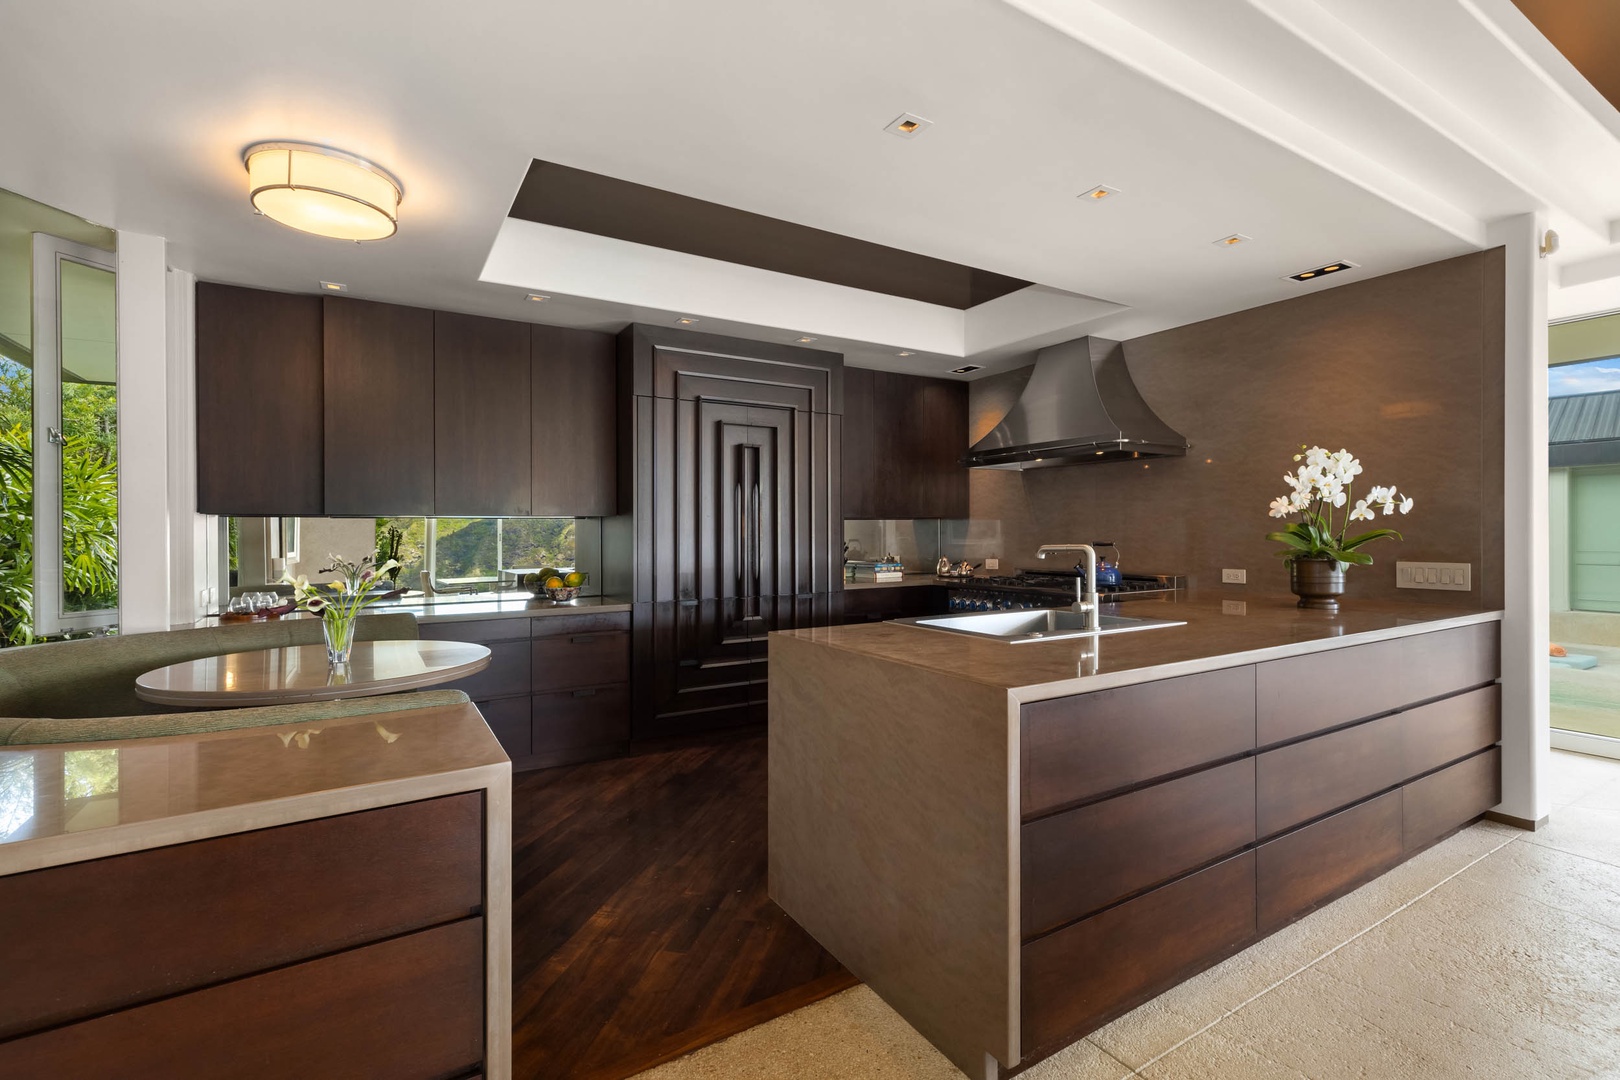 Honolulu Vacation Rentals, Sky Ridge House - Experience modern elegance paired with functionality in this kitchen, where culinary dreams come to life.